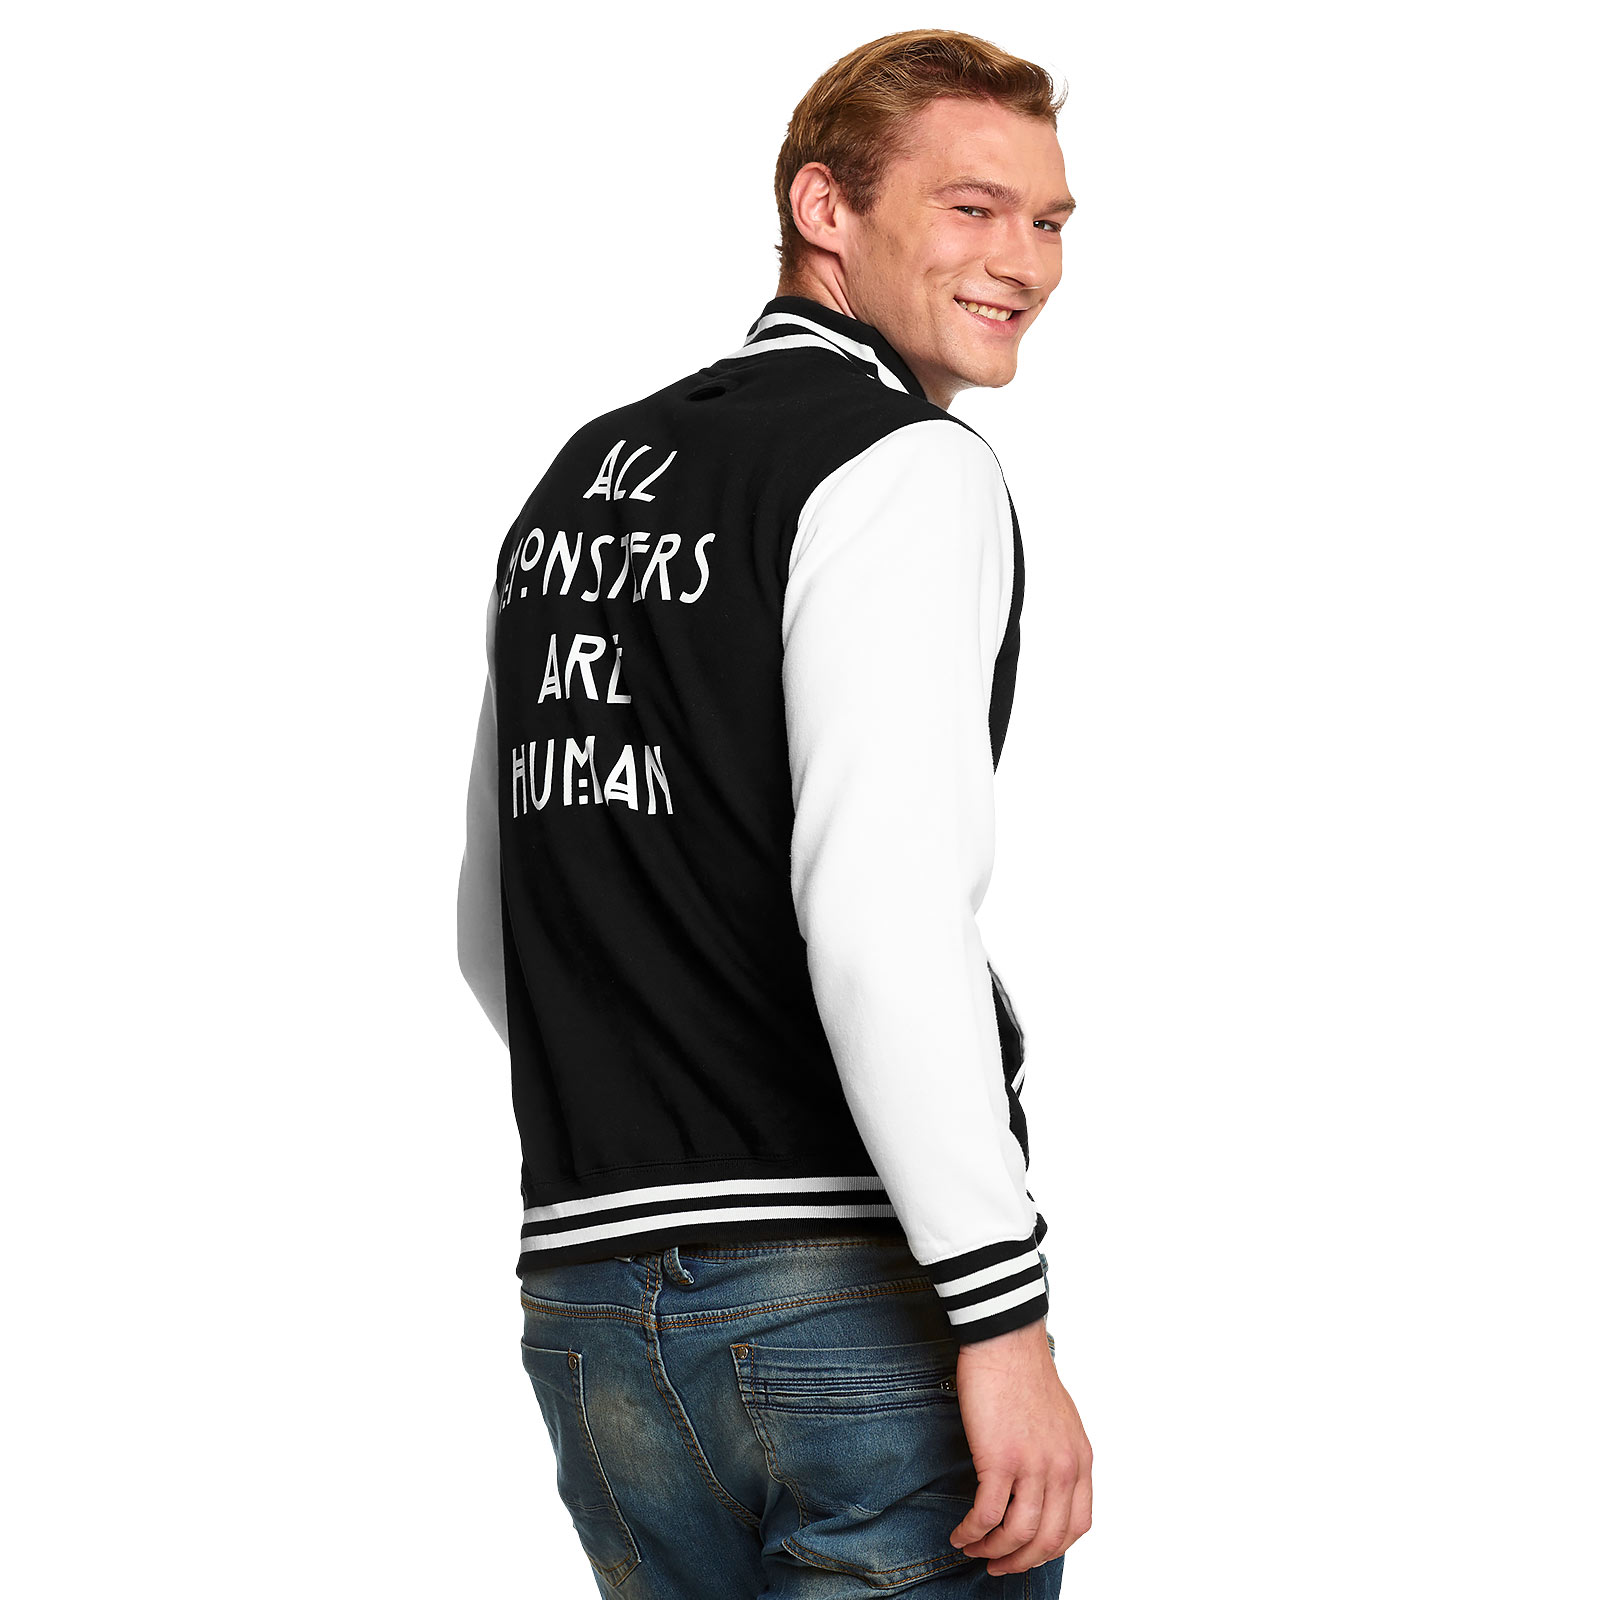 American Horror Story - All Monsters Are Human Varsity Jacket